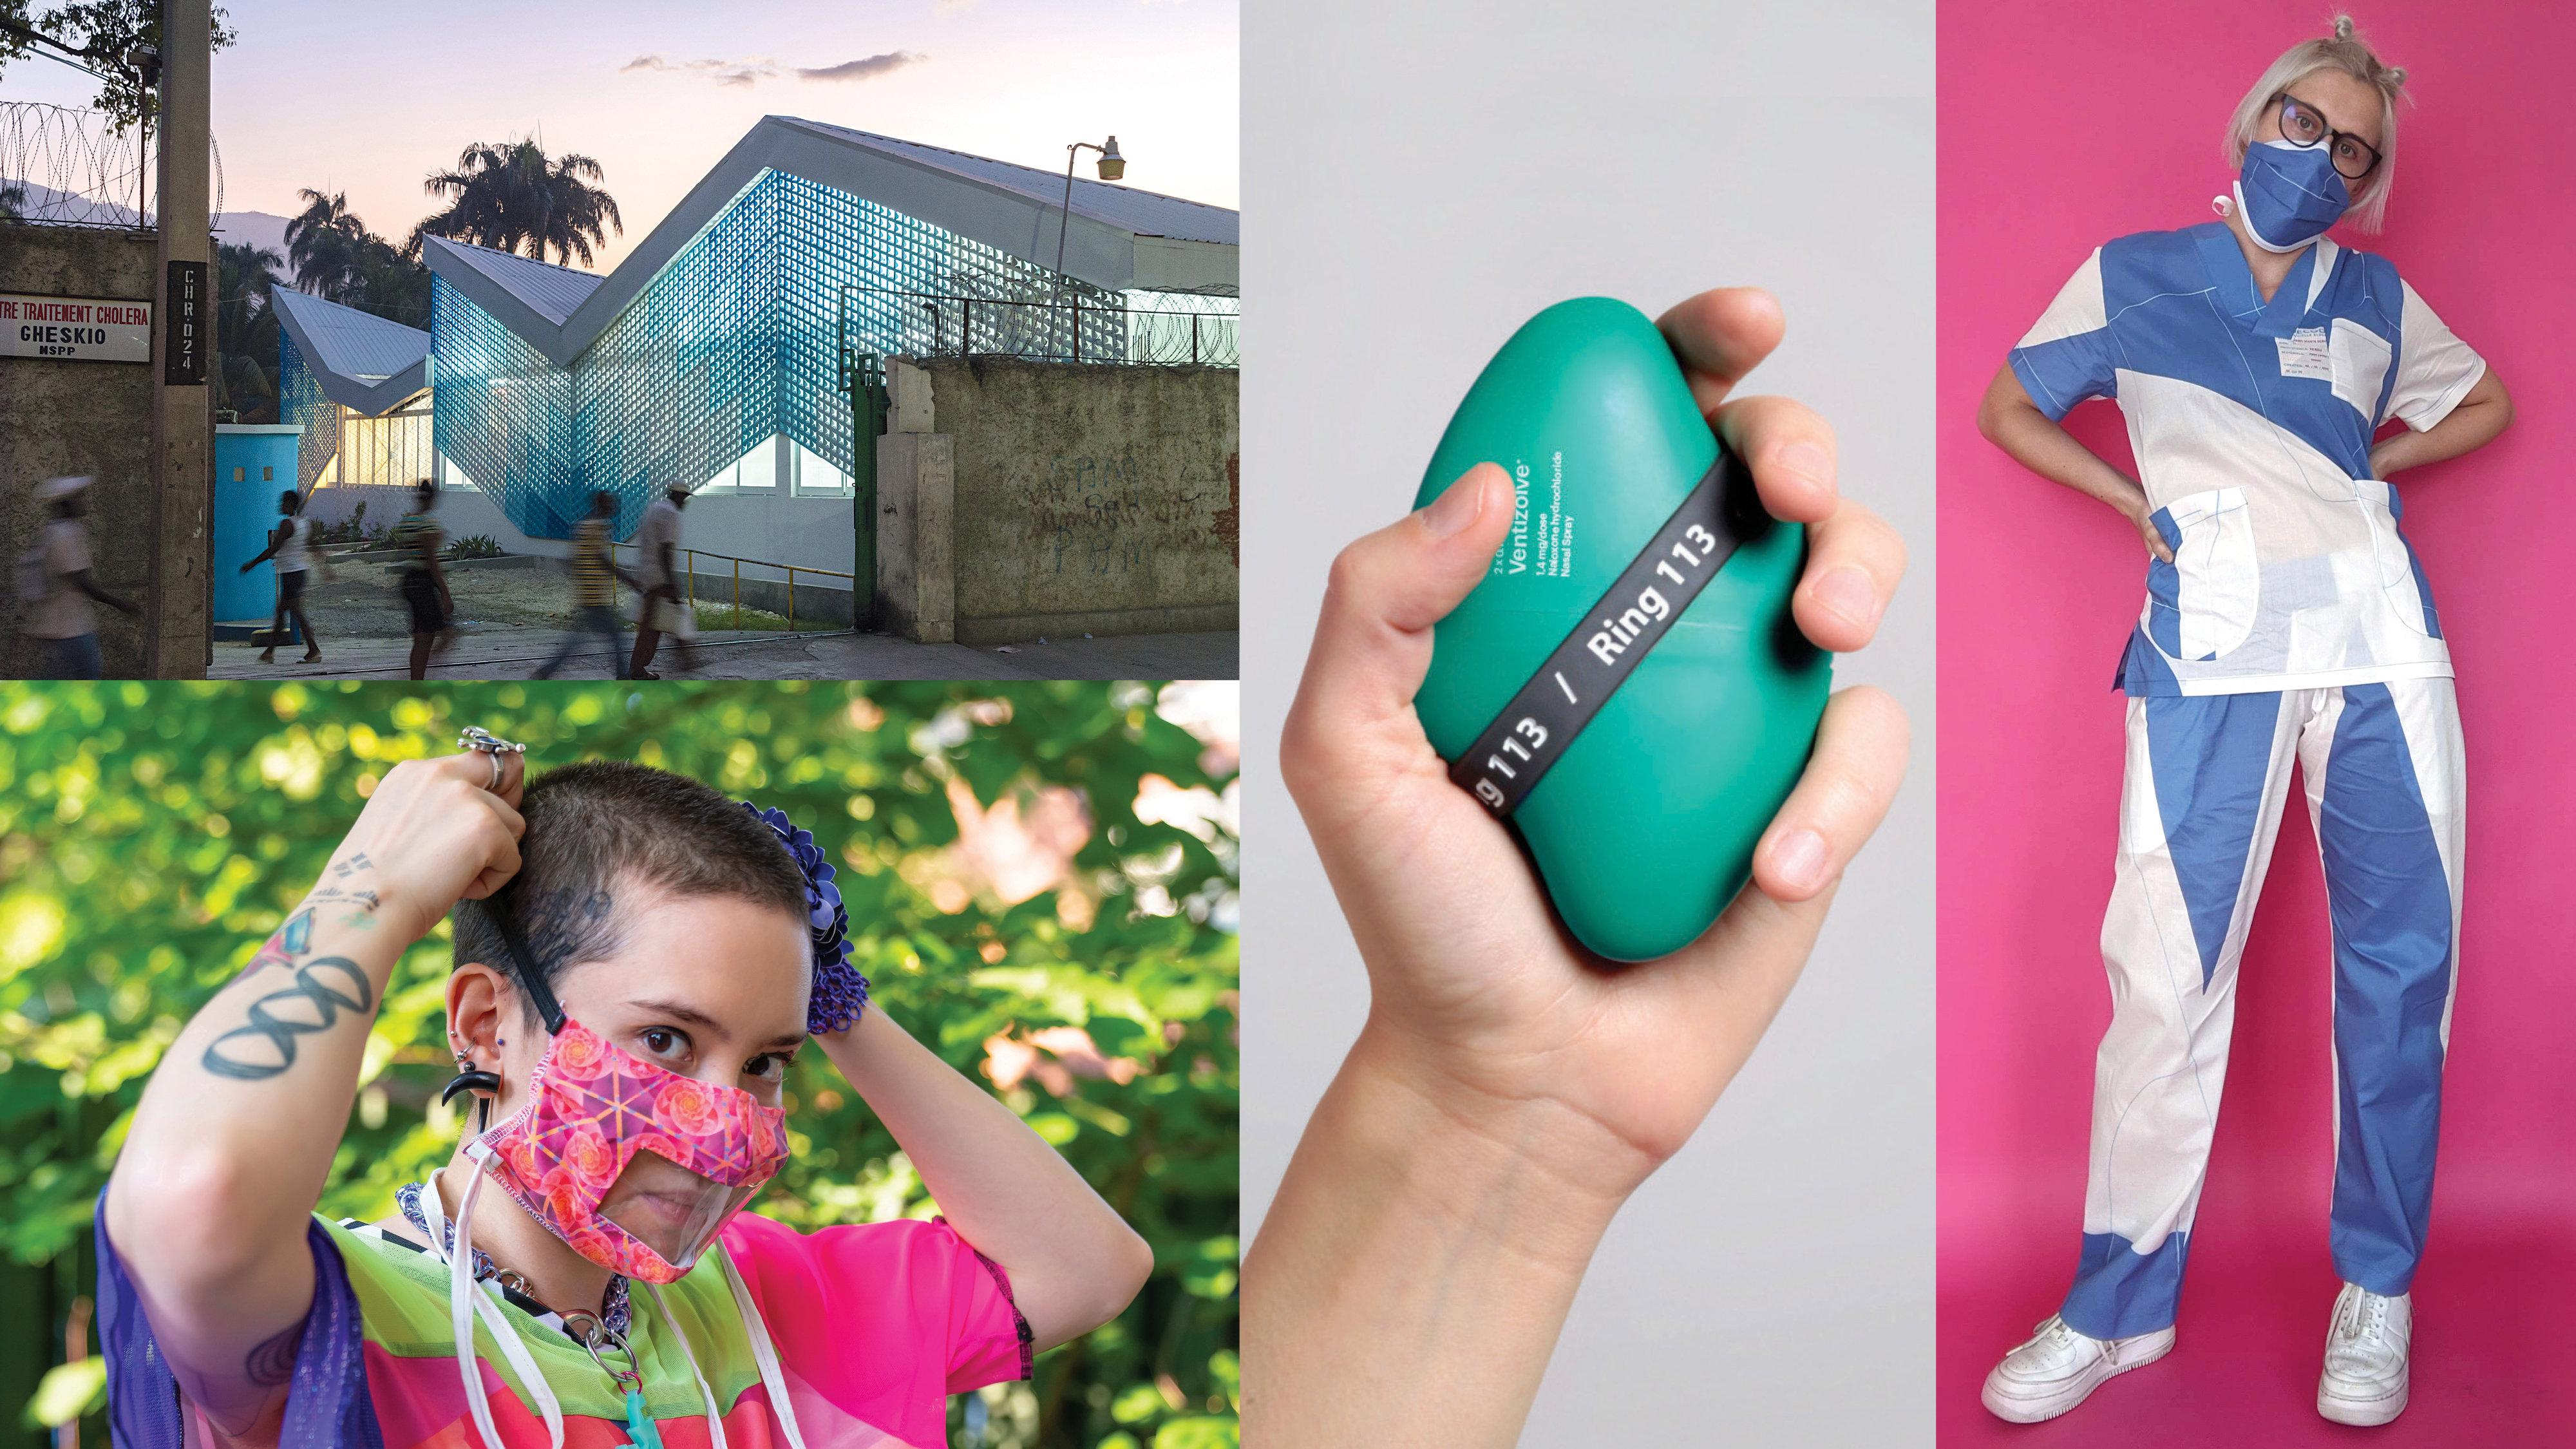 A collage of four images, in the top left is the illuminated exterior of a cholera treatment center, beneath is a figure putting on a multi-colored mask with a clear section over the lips, in the center a hand holds a lozenge-shaped green plastic device, to the right is a person wearing blue and white scrubs against a pink background